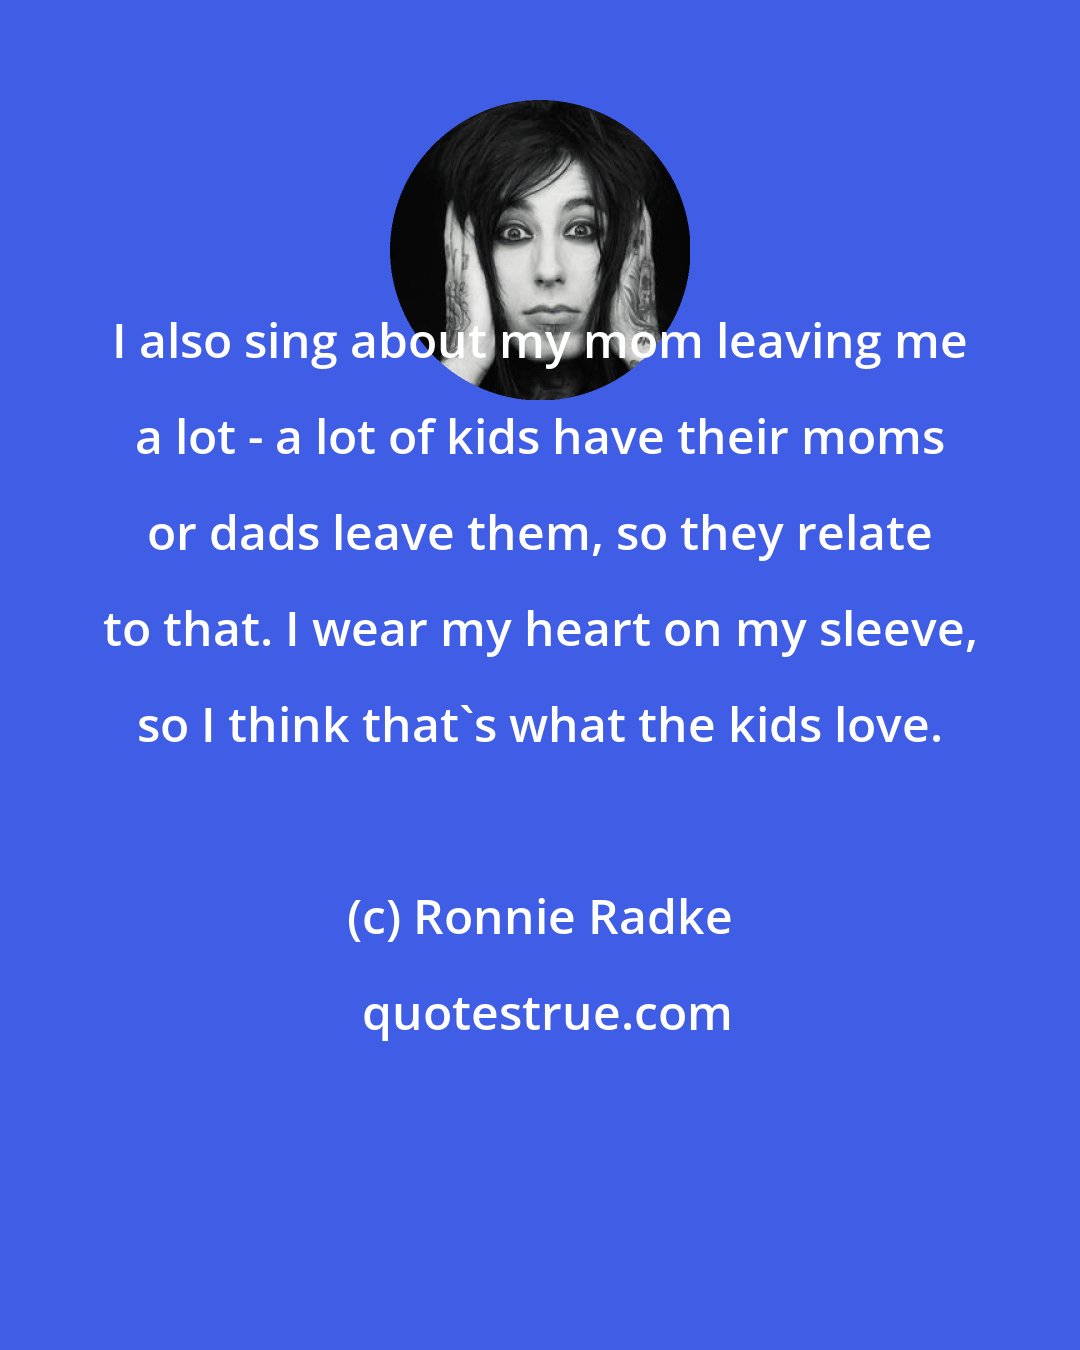 Ronnie Radke: I also sing about my mom leaving me a lot - a lot of kids have their moms or dads leave them, so they relate to that. I wear my heart on my sleeve, so I think that's what the kids love.